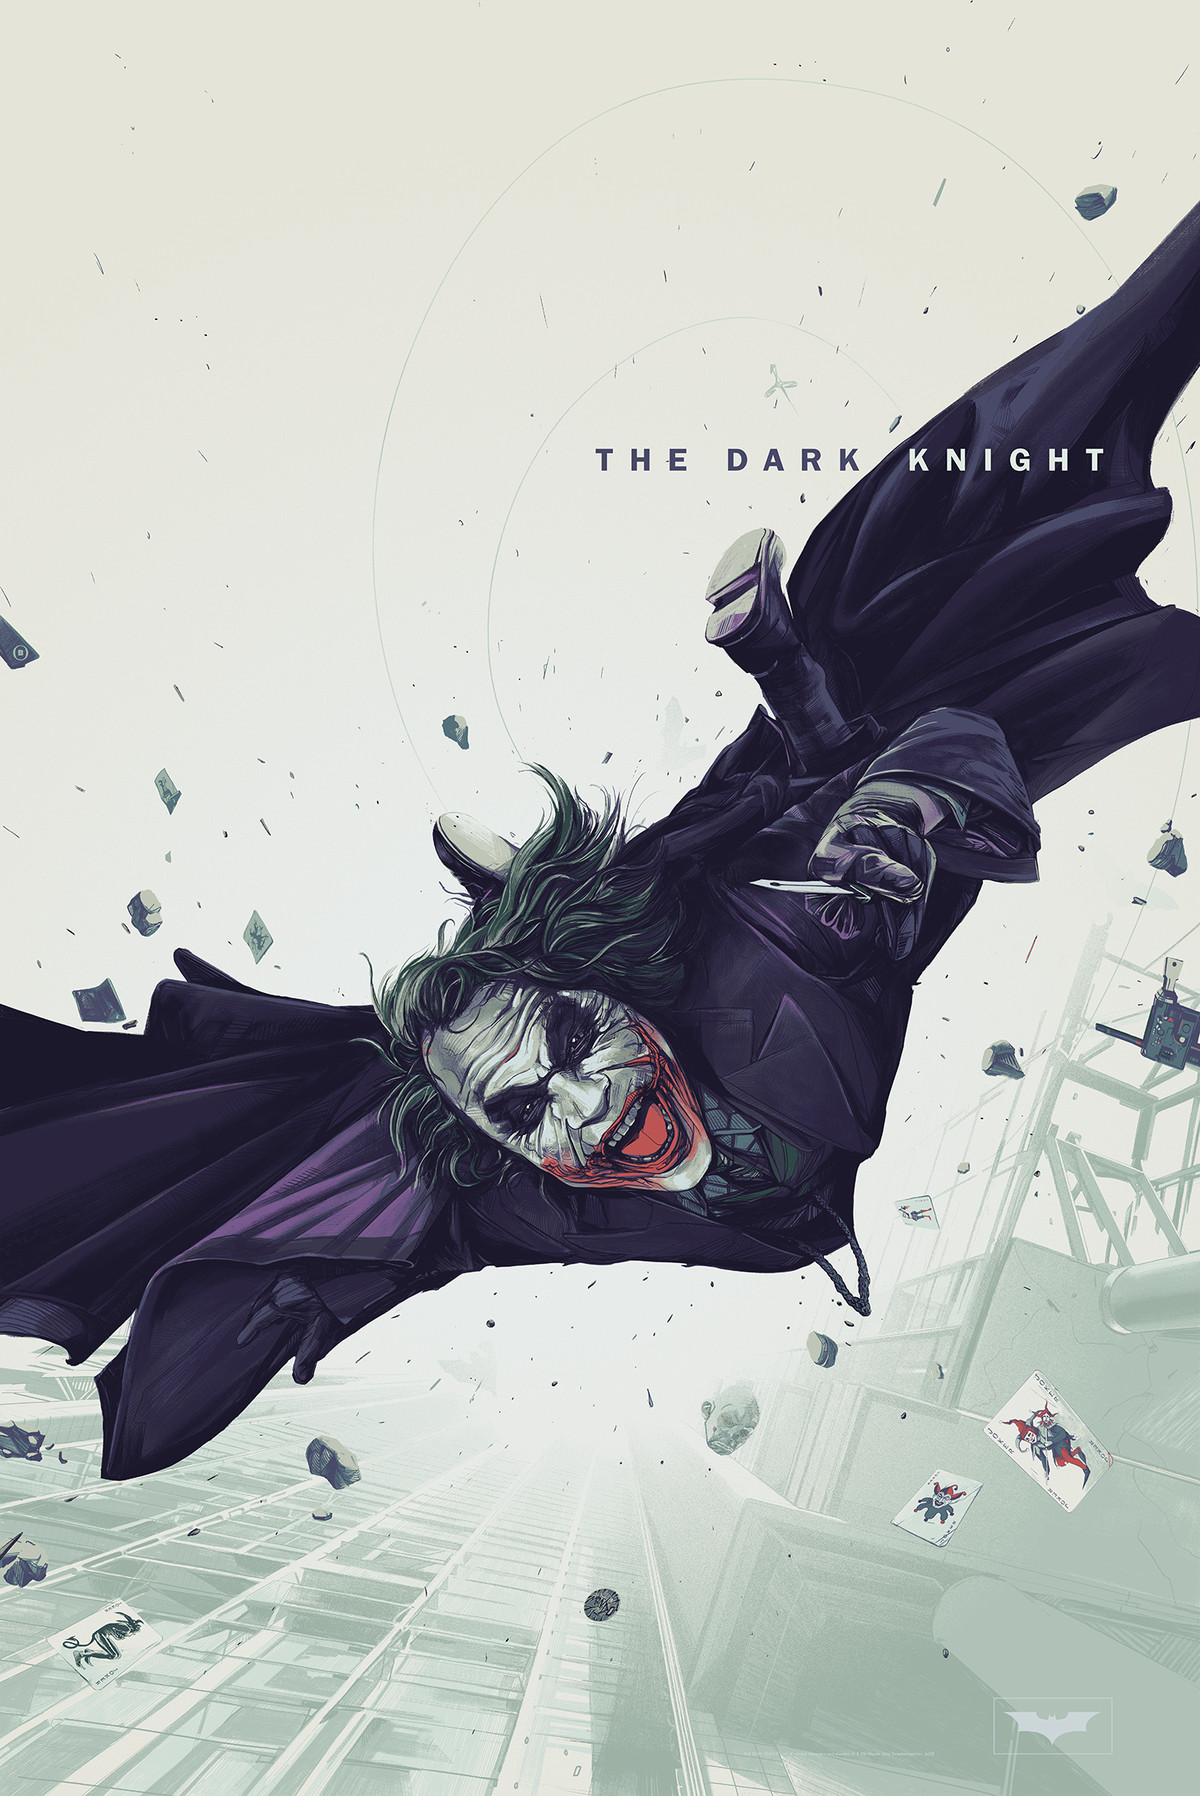 The Joker leaping from a high-rise with a knife.